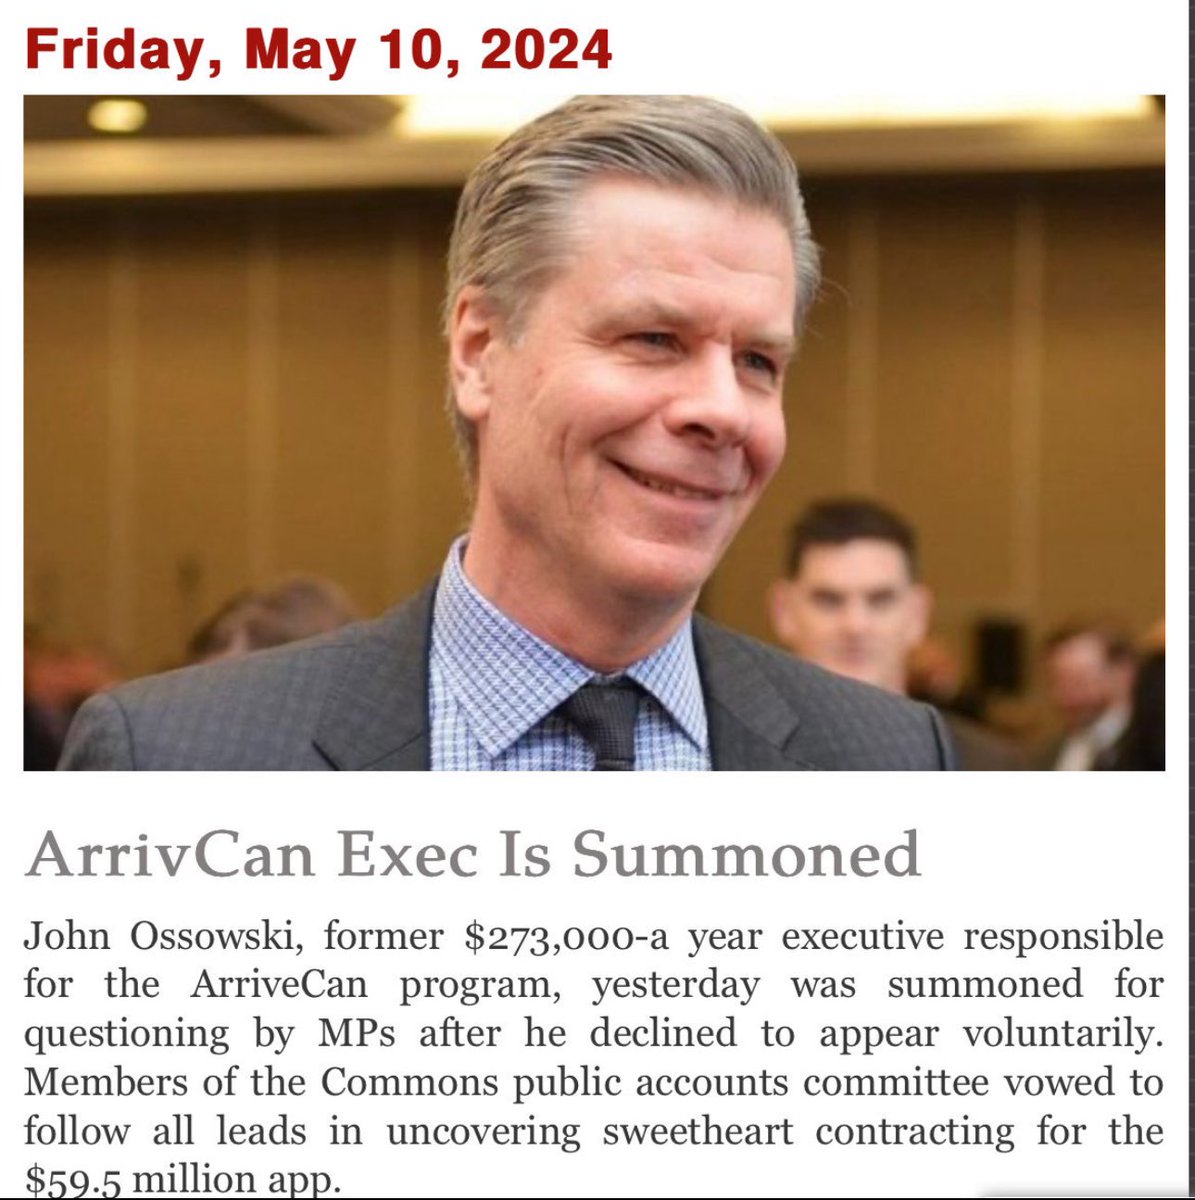 BREAKING 

ArriveScam Exec, with a hefty $273,000 salary, is set to testify before committee. 

How did an $80K app balloon into a $60M taxpayer nightmare? 

It's not just bureaucratic mismanagement; it's a stark reminder of Liberal fiscal irresponsibility.

Follow for updates.